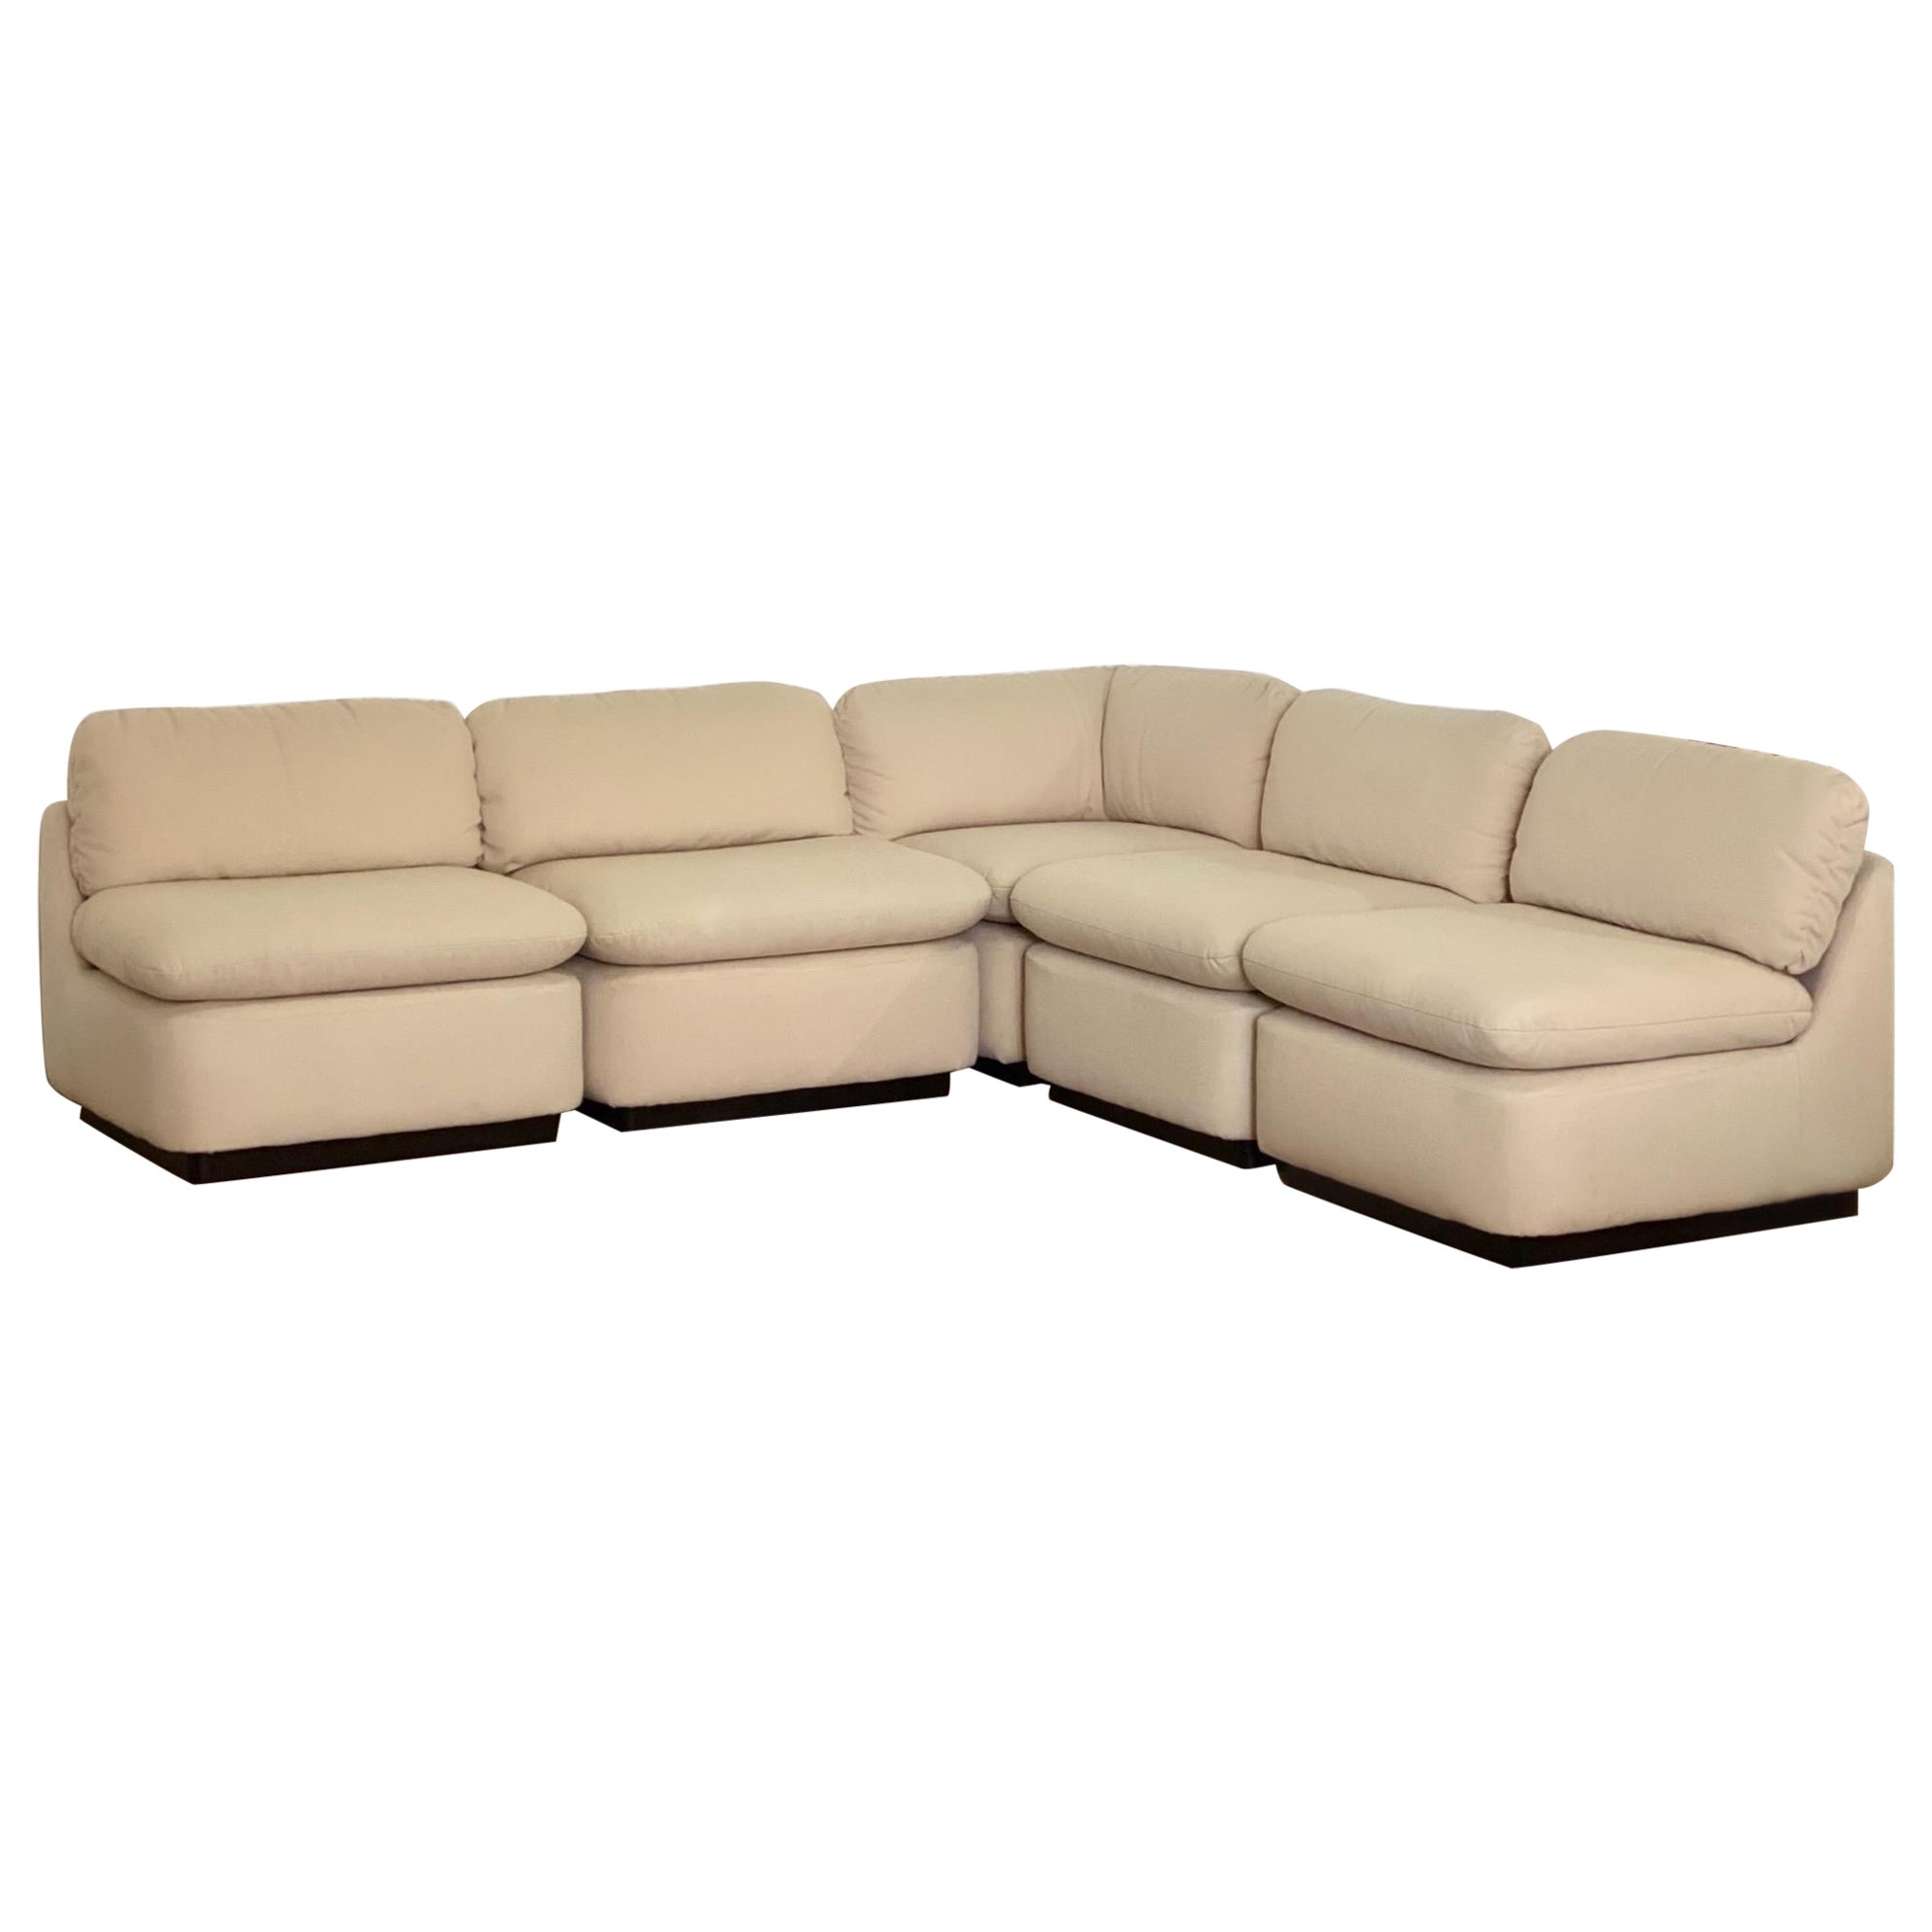 1990s Directional White Ivory Five Piece Modular Lounge Sectional – 5 Pieces For Sale